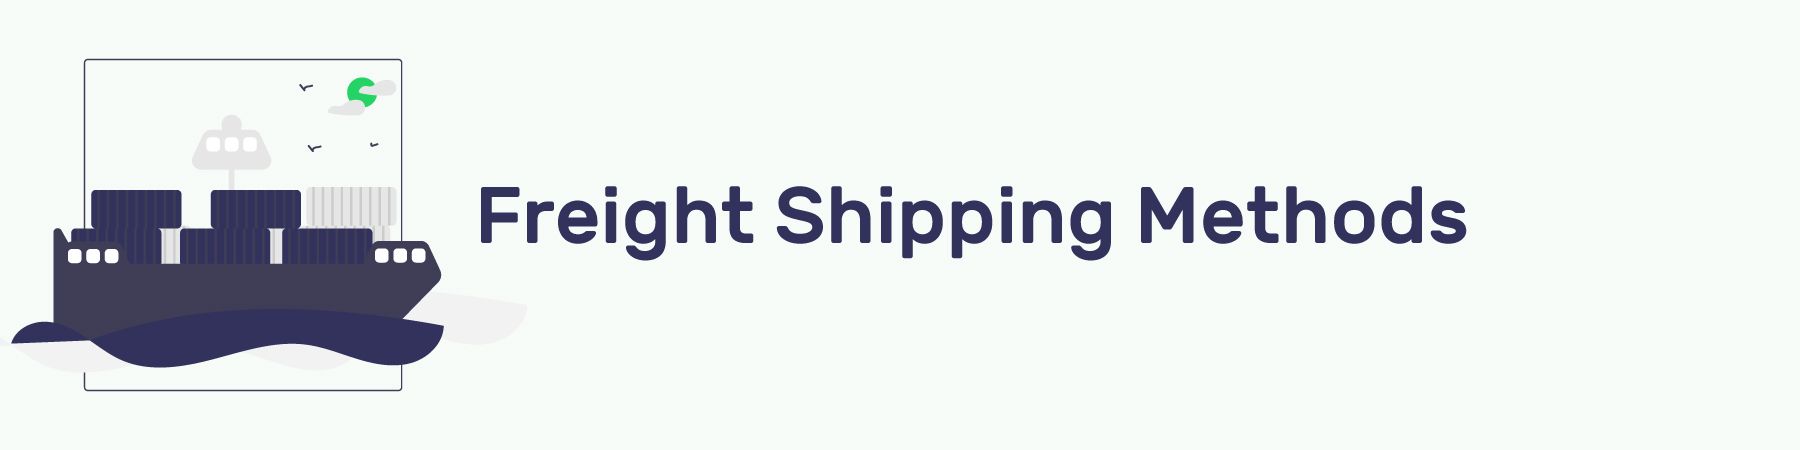 Freight Shipping Methods Section Header